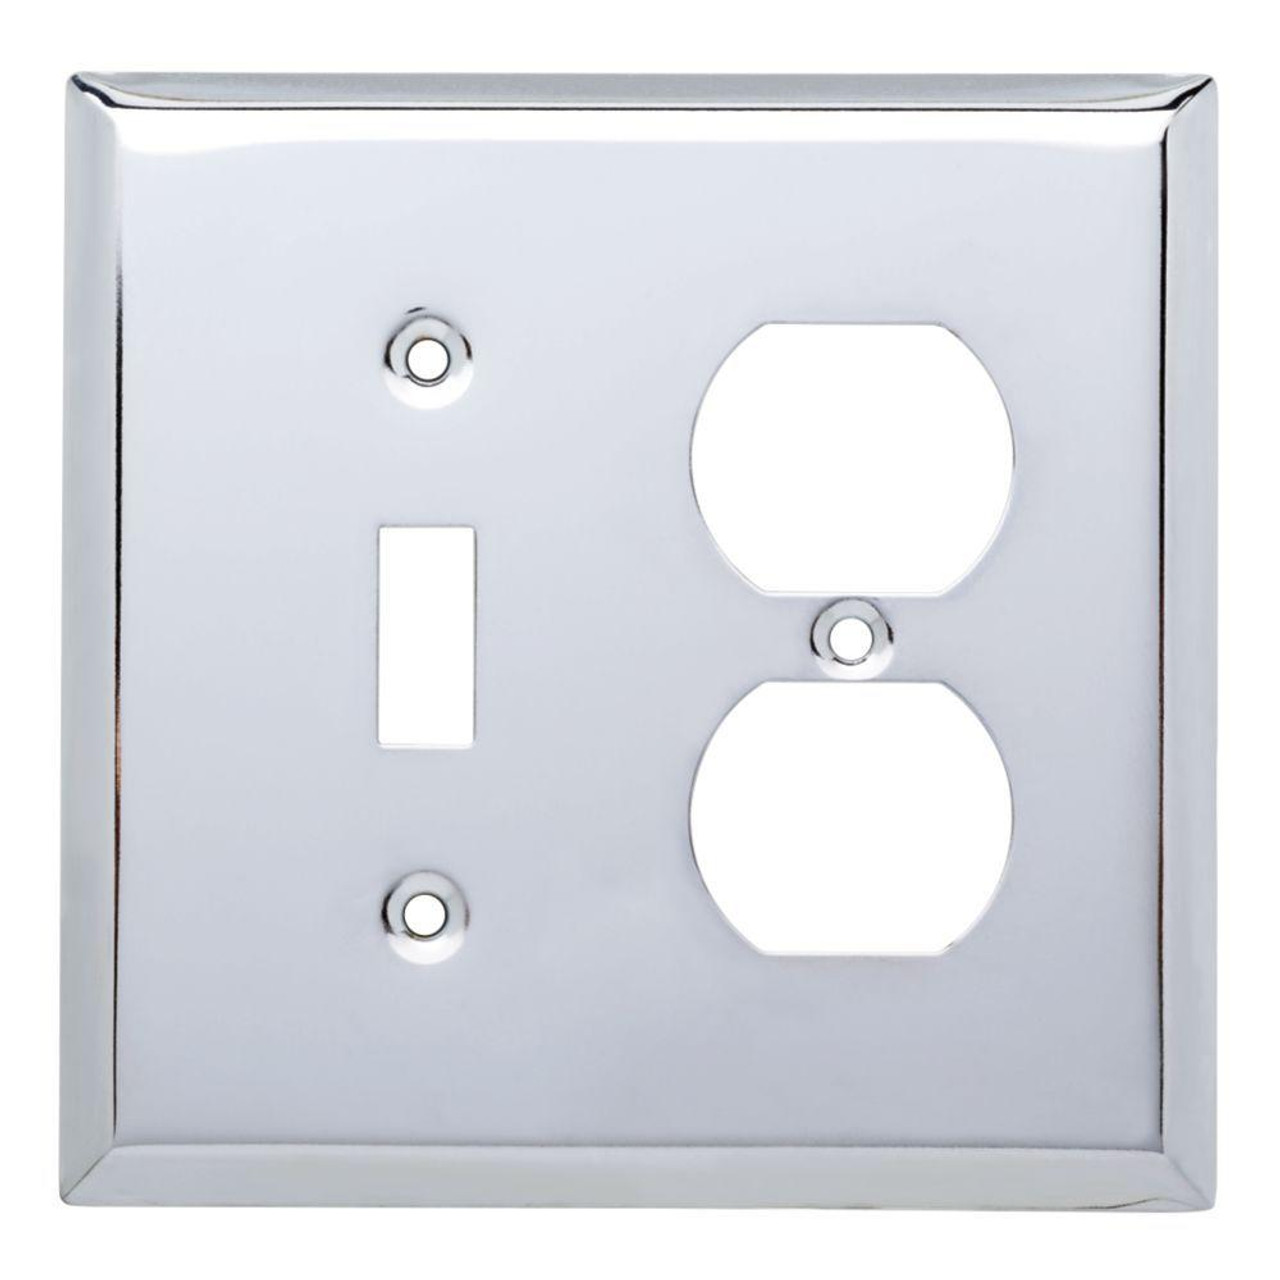 64359 Chrome Stamped Steel Single Switch/Duplex Cover Plate